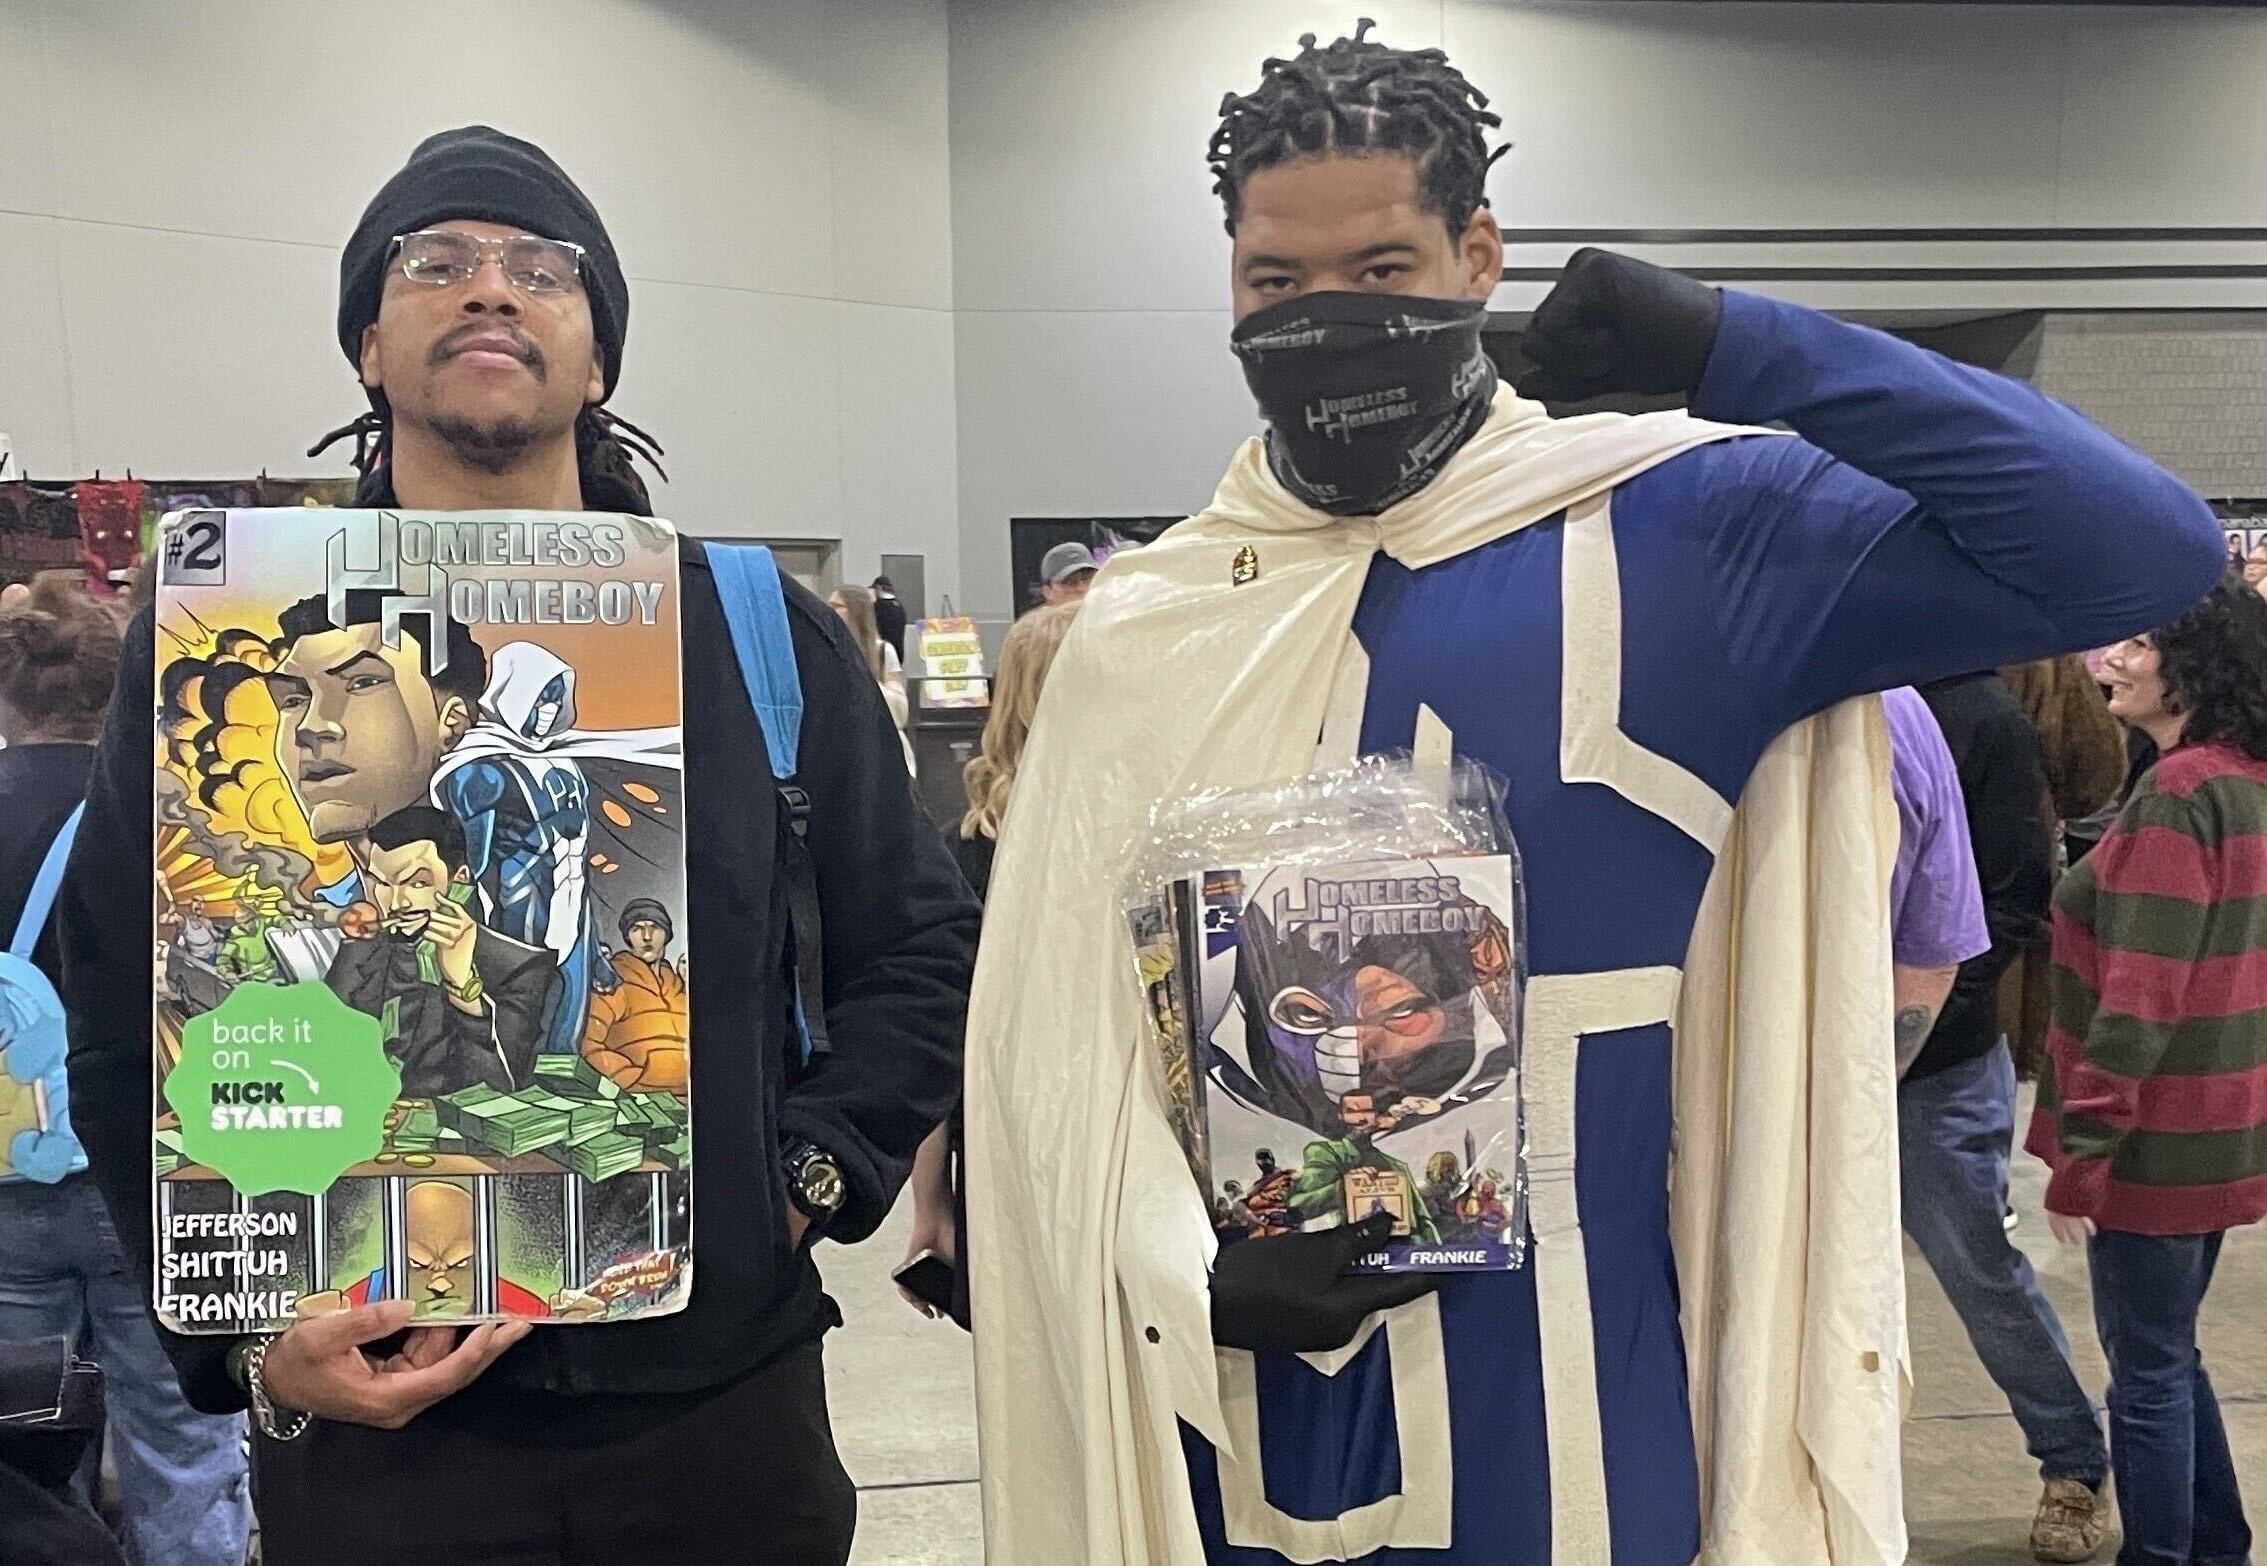  Derek Jefferson (right) dressed as the superhero from his own comic book series, "Homeless Homeboy"